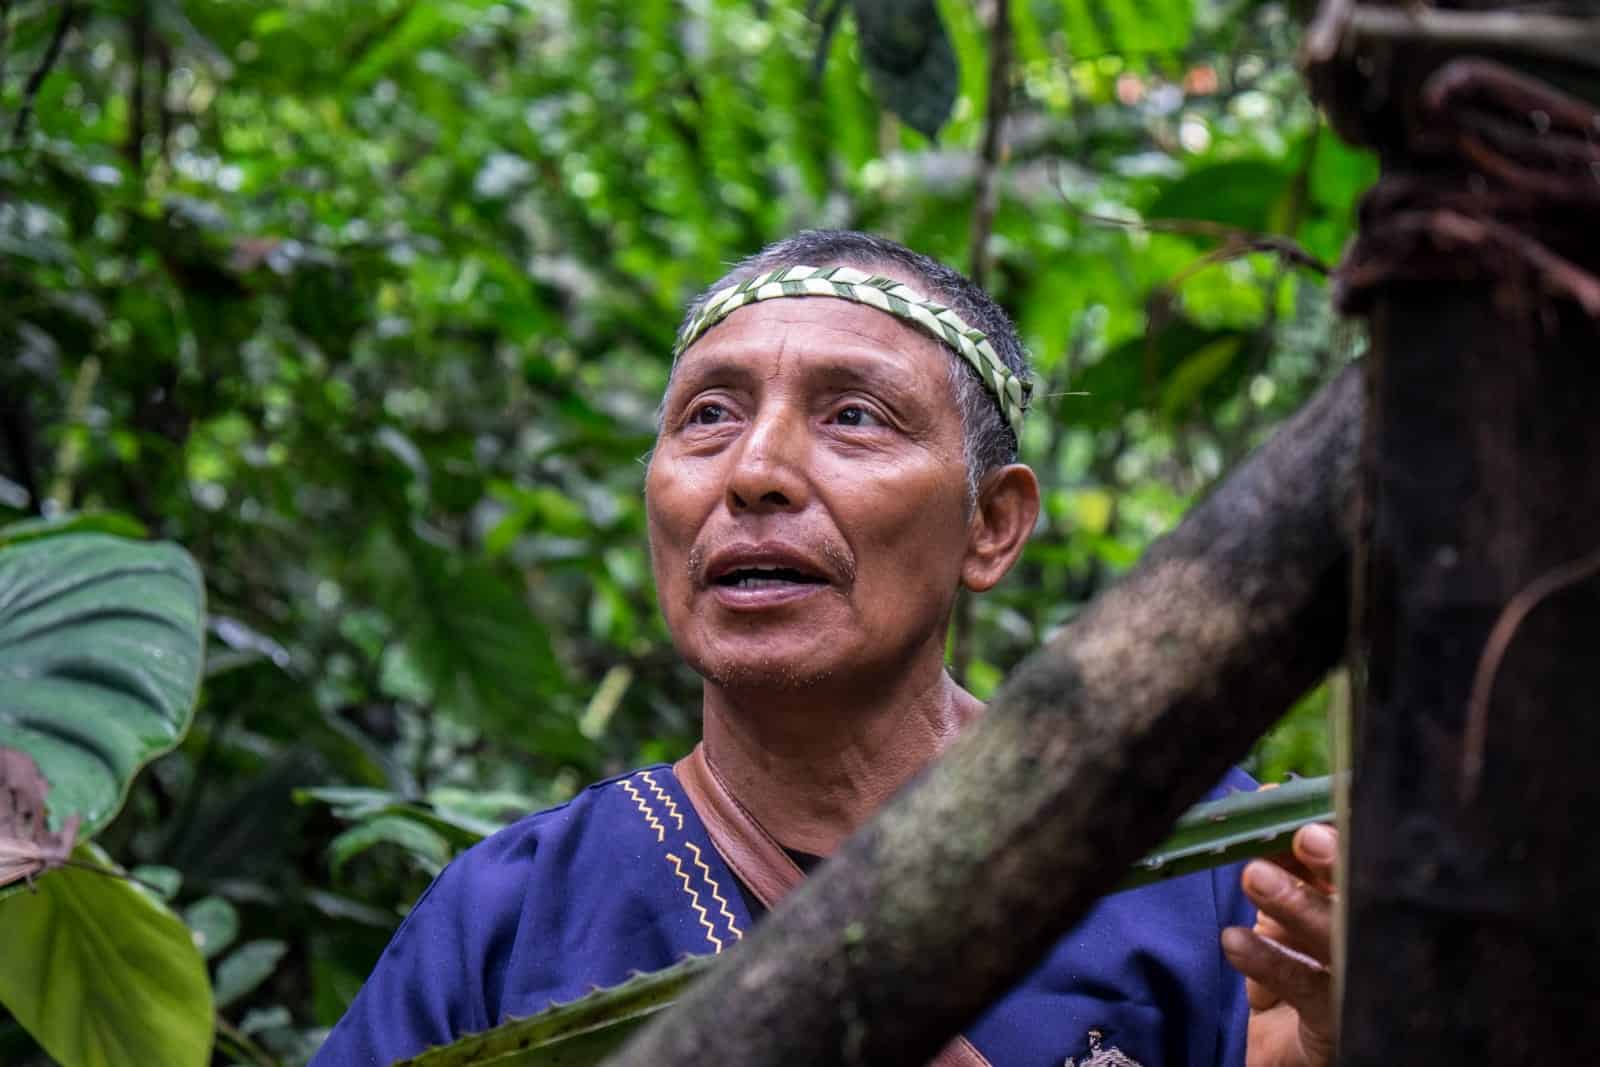 Local man, Delfin wearing a headband weaved from leaves, holds a long plant while standing in the jungle of the Ecuador Amazon Rainforest.